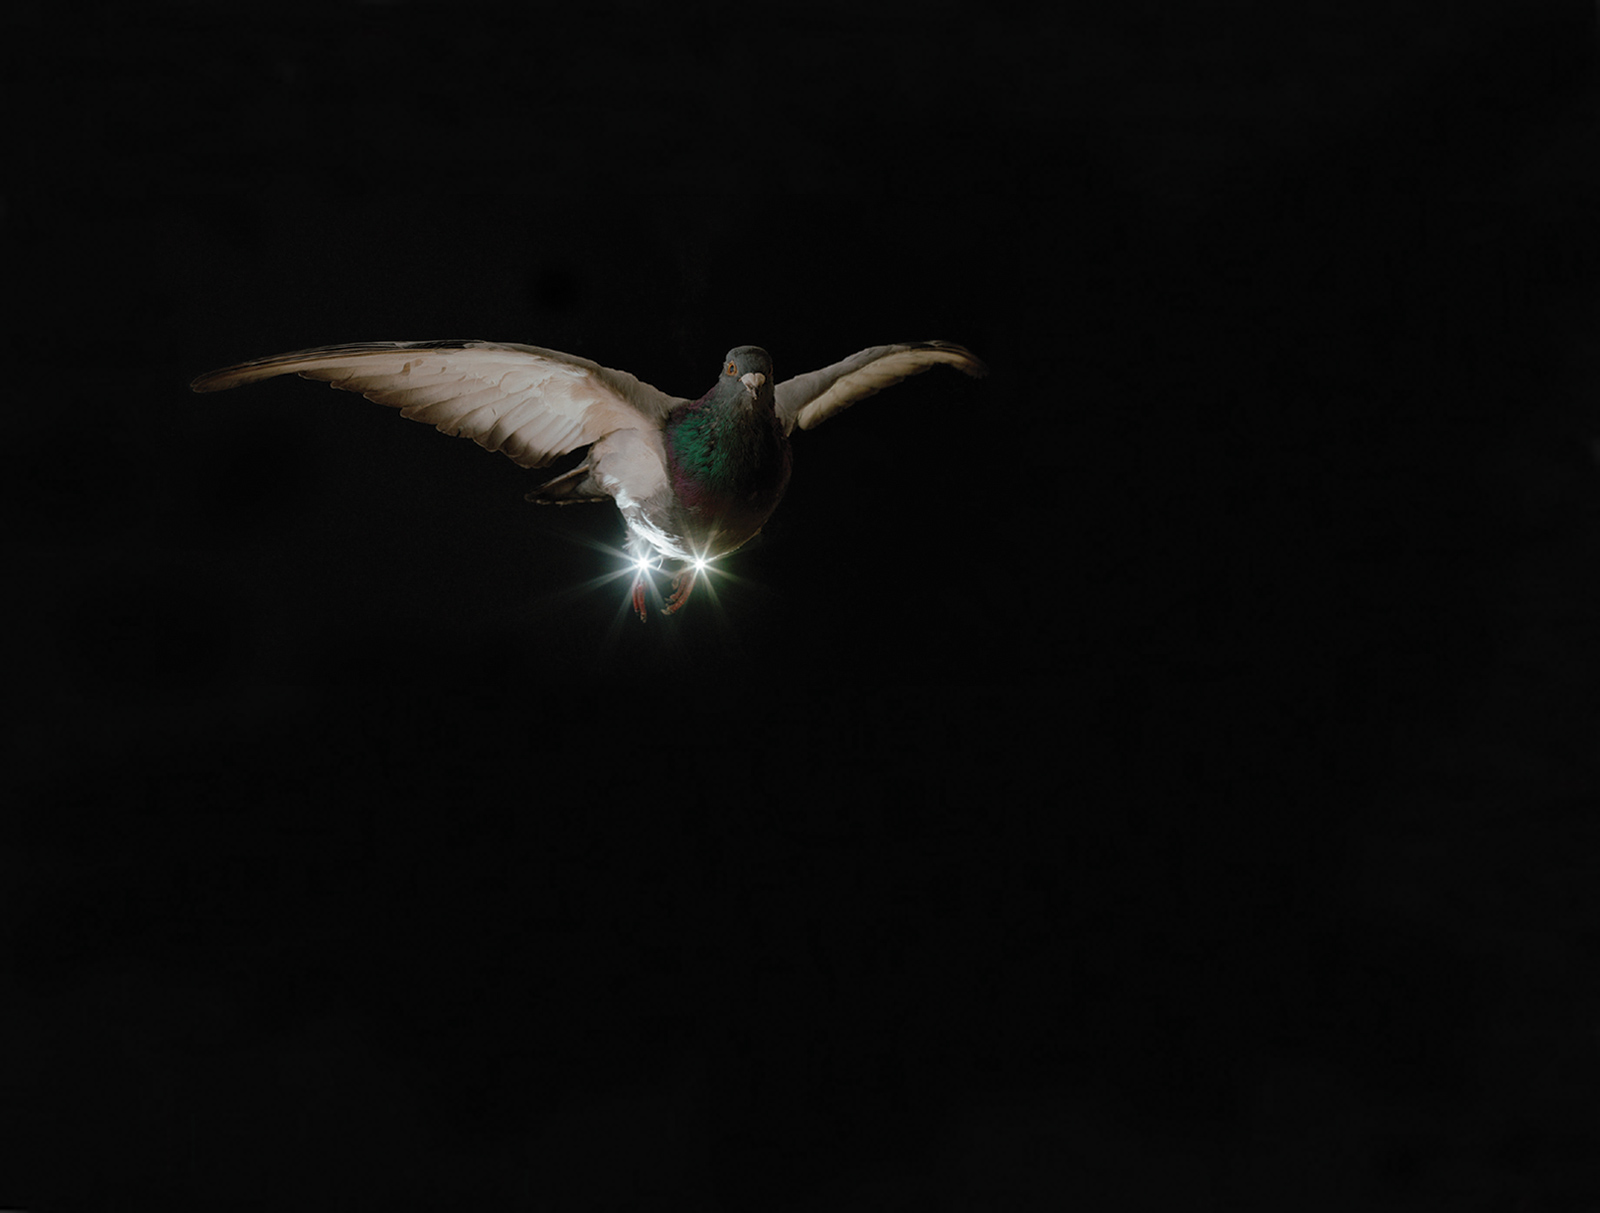 A two thousand and five photograph of a pigeon in flight with lights attached to its legs by Jasper van den Brink titled “Pigeons Don’t Fly At Night, number 2.”